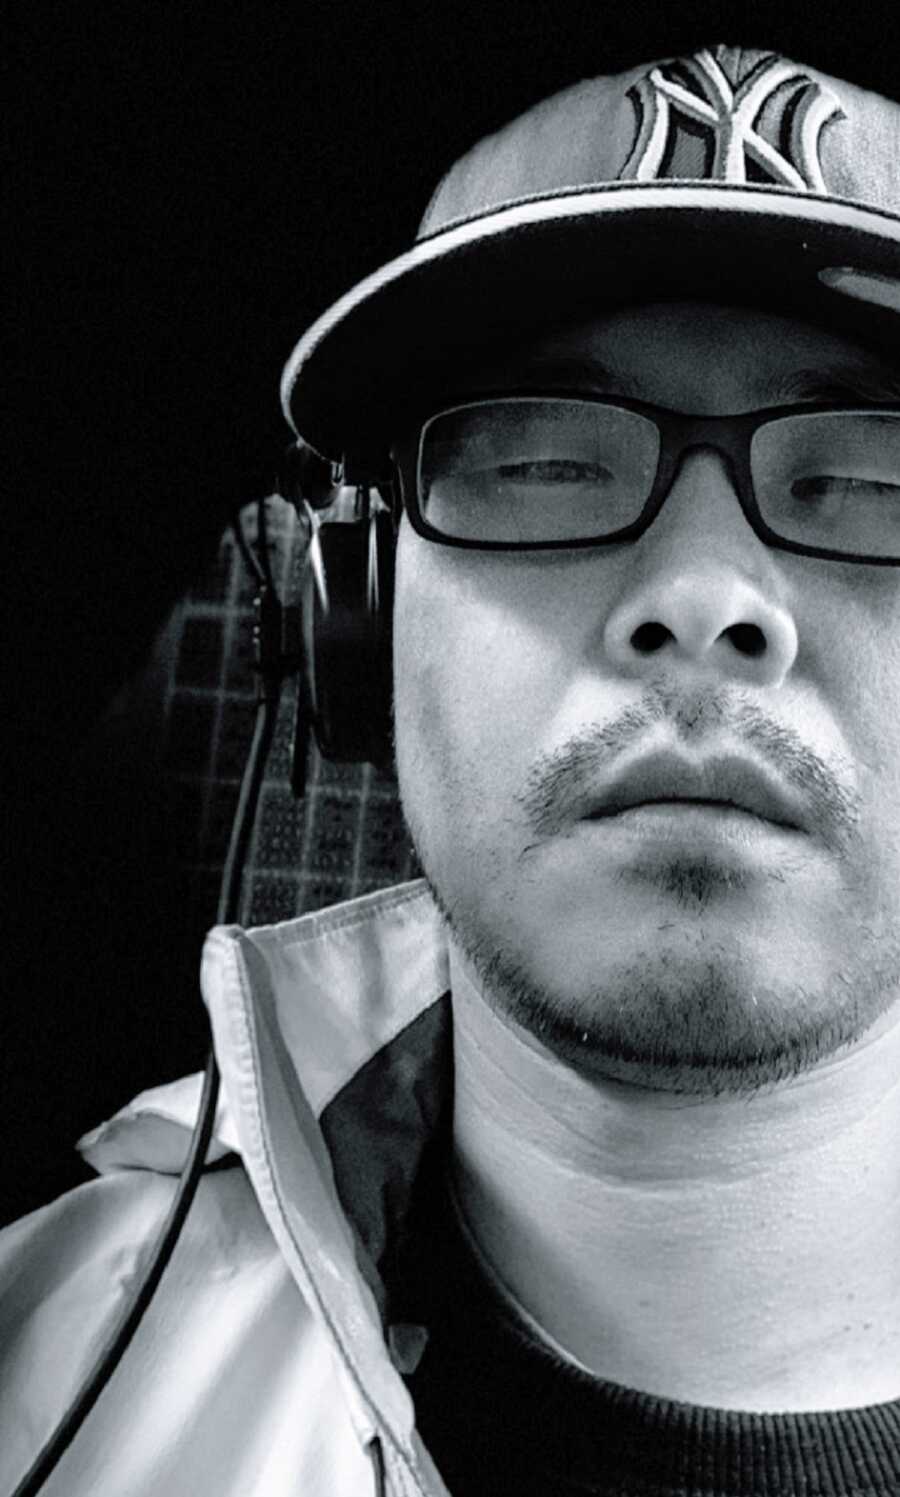 A visually impaired man wearing glasses and over-ear headphones